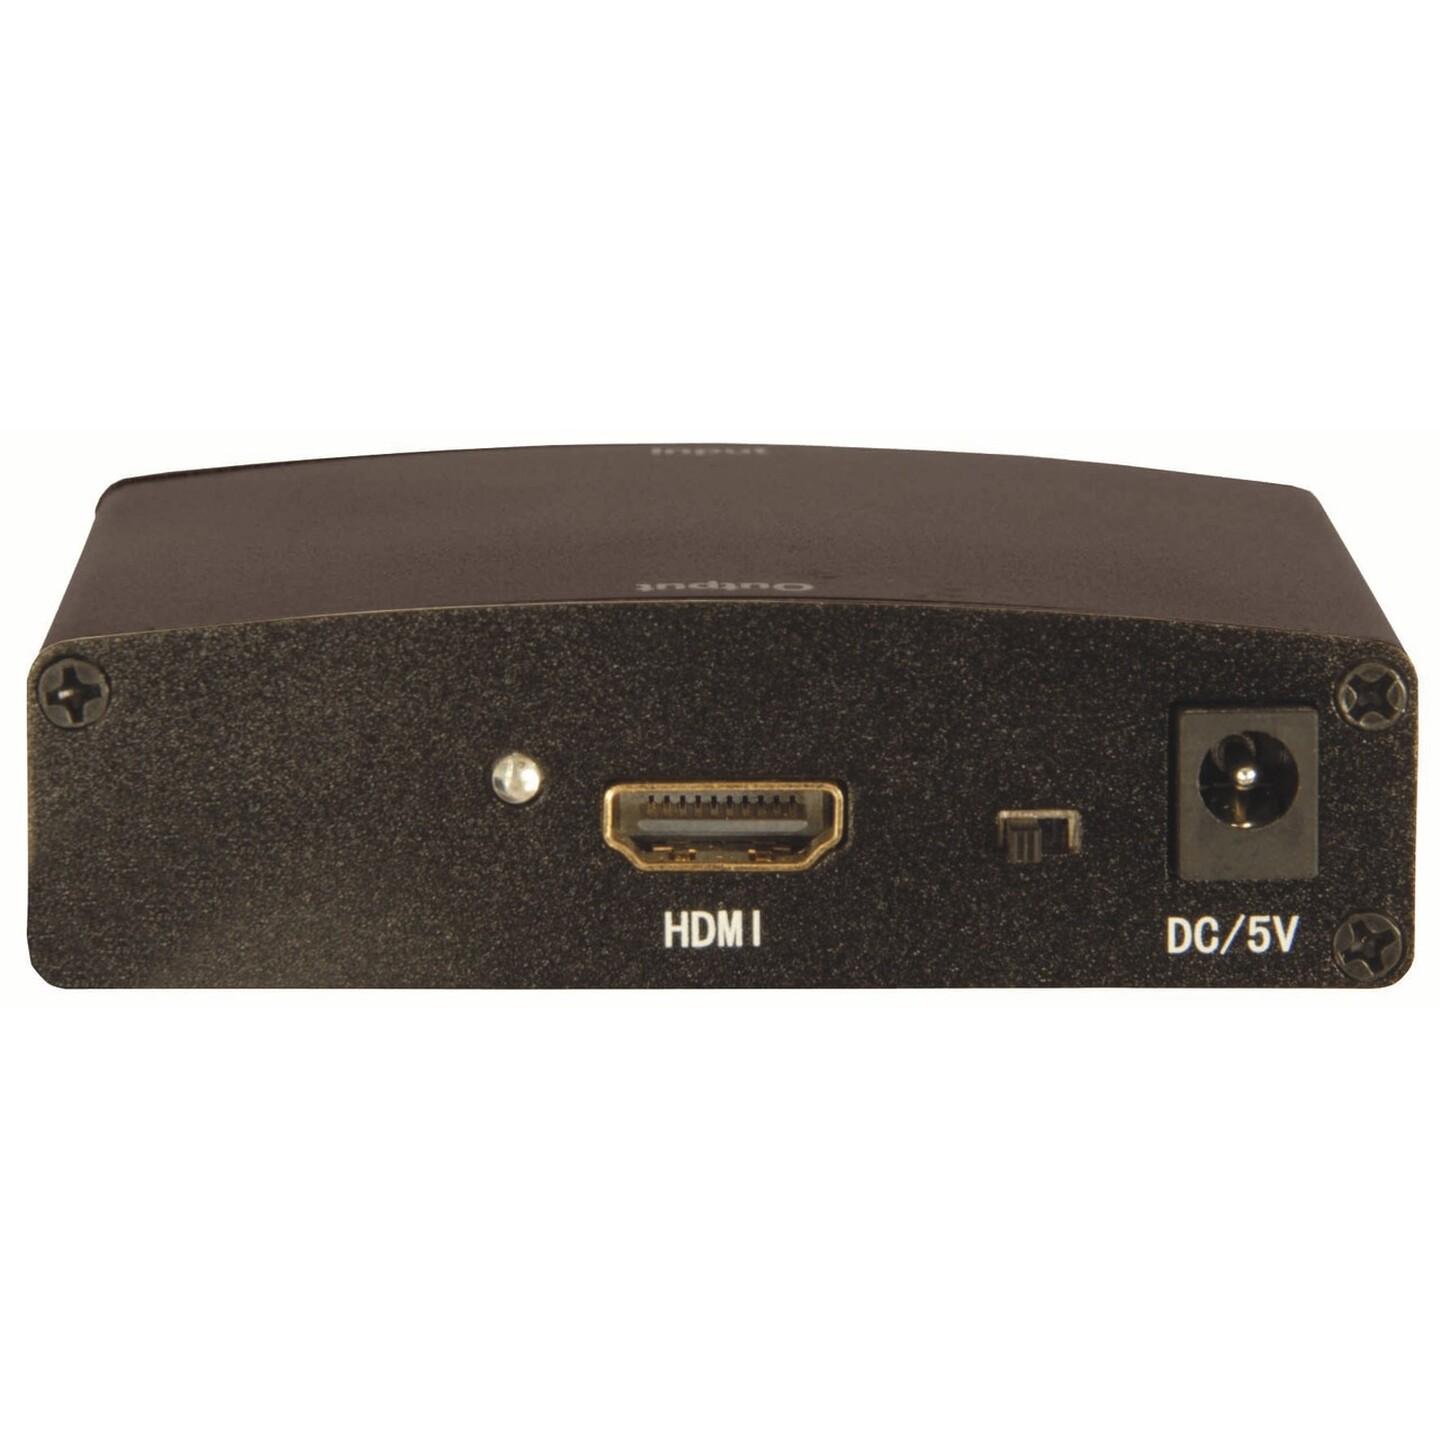 Active Component Video to HDMI Converter